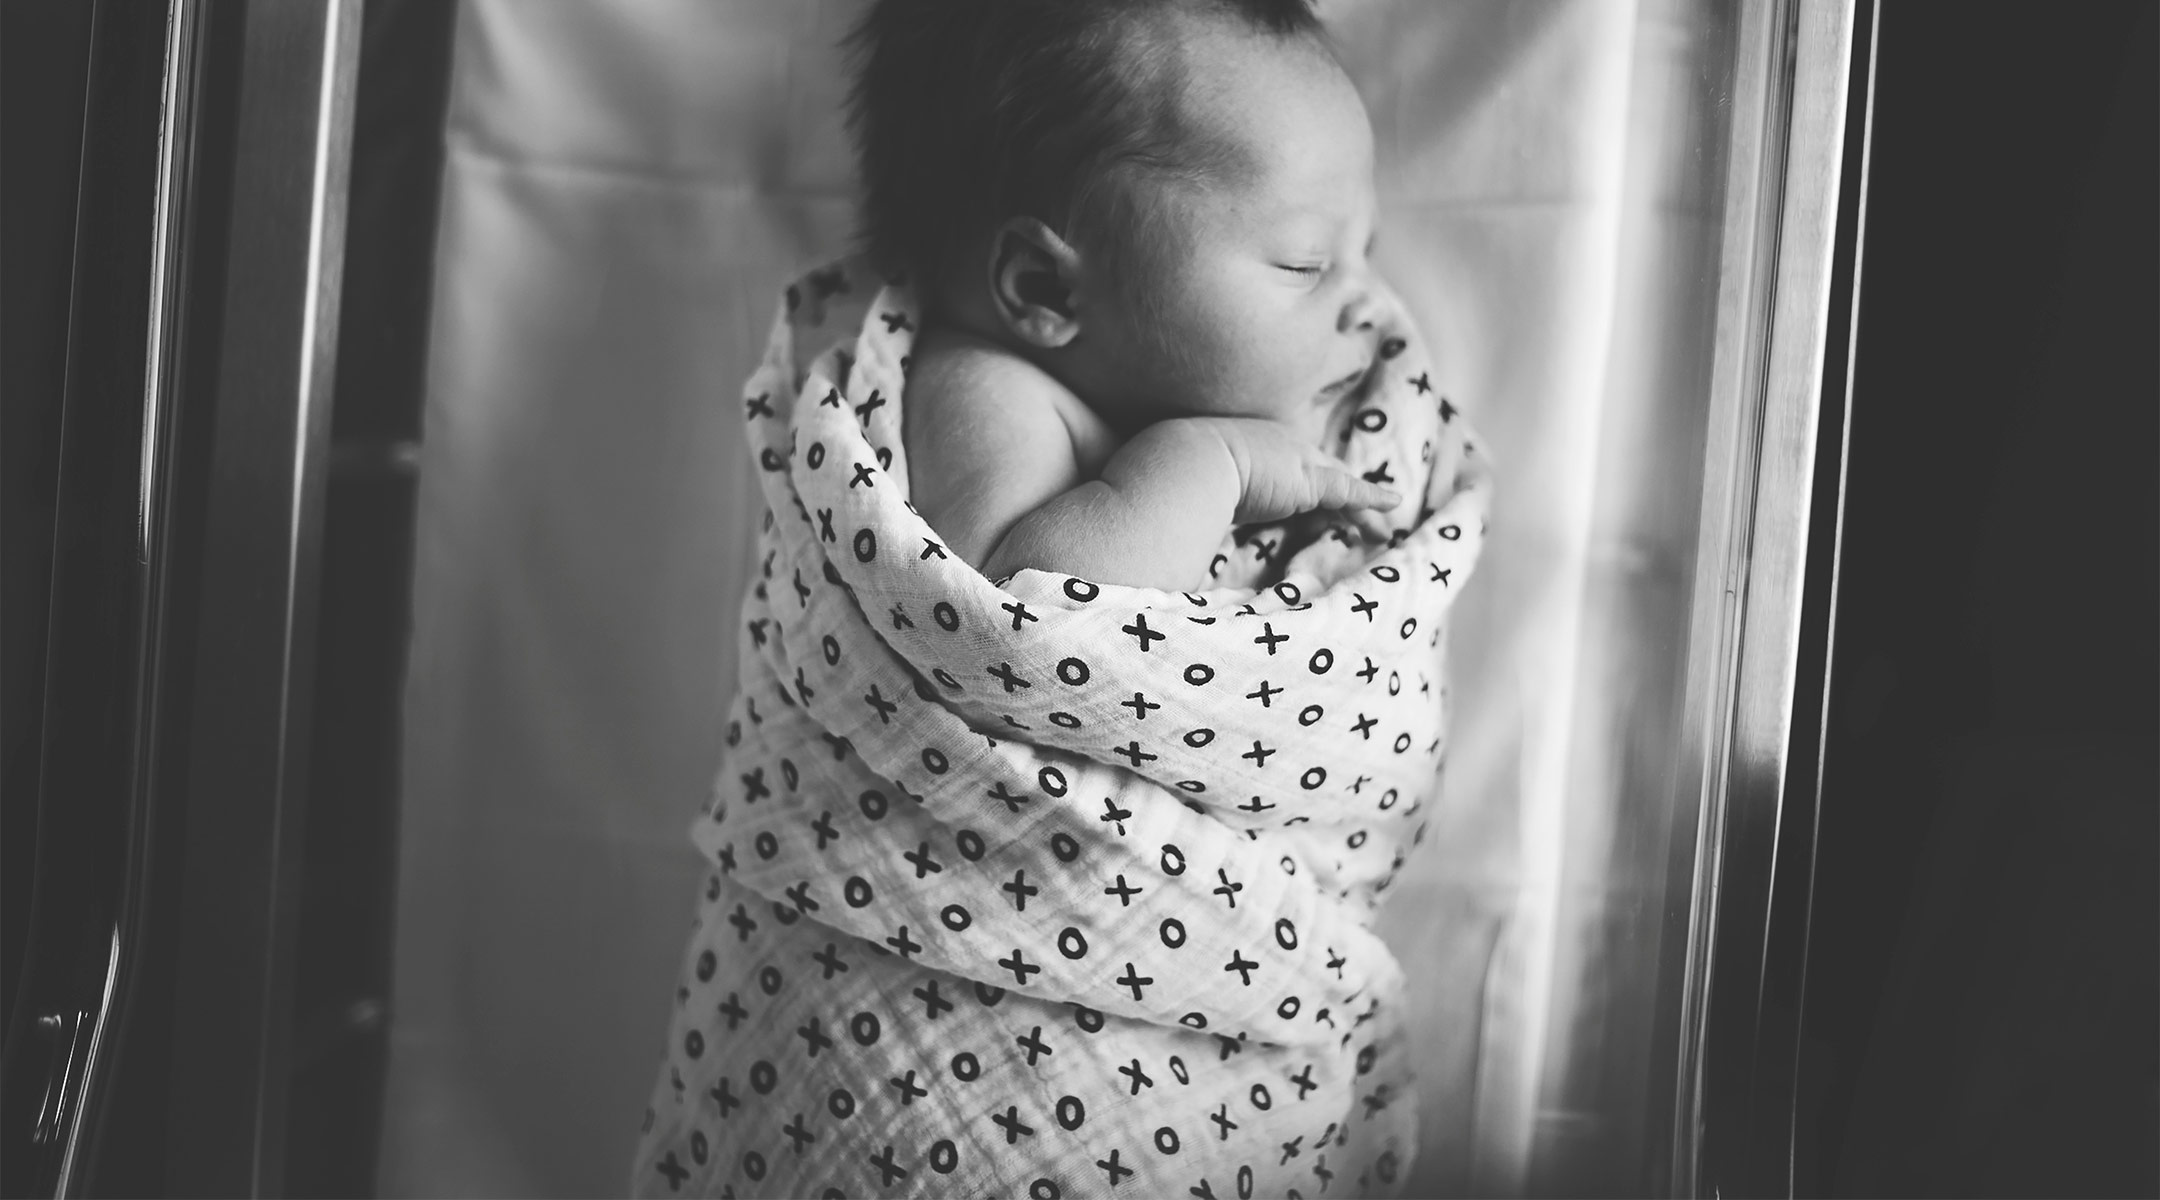 newborn baby wrapped in pattern blanket at the hospital